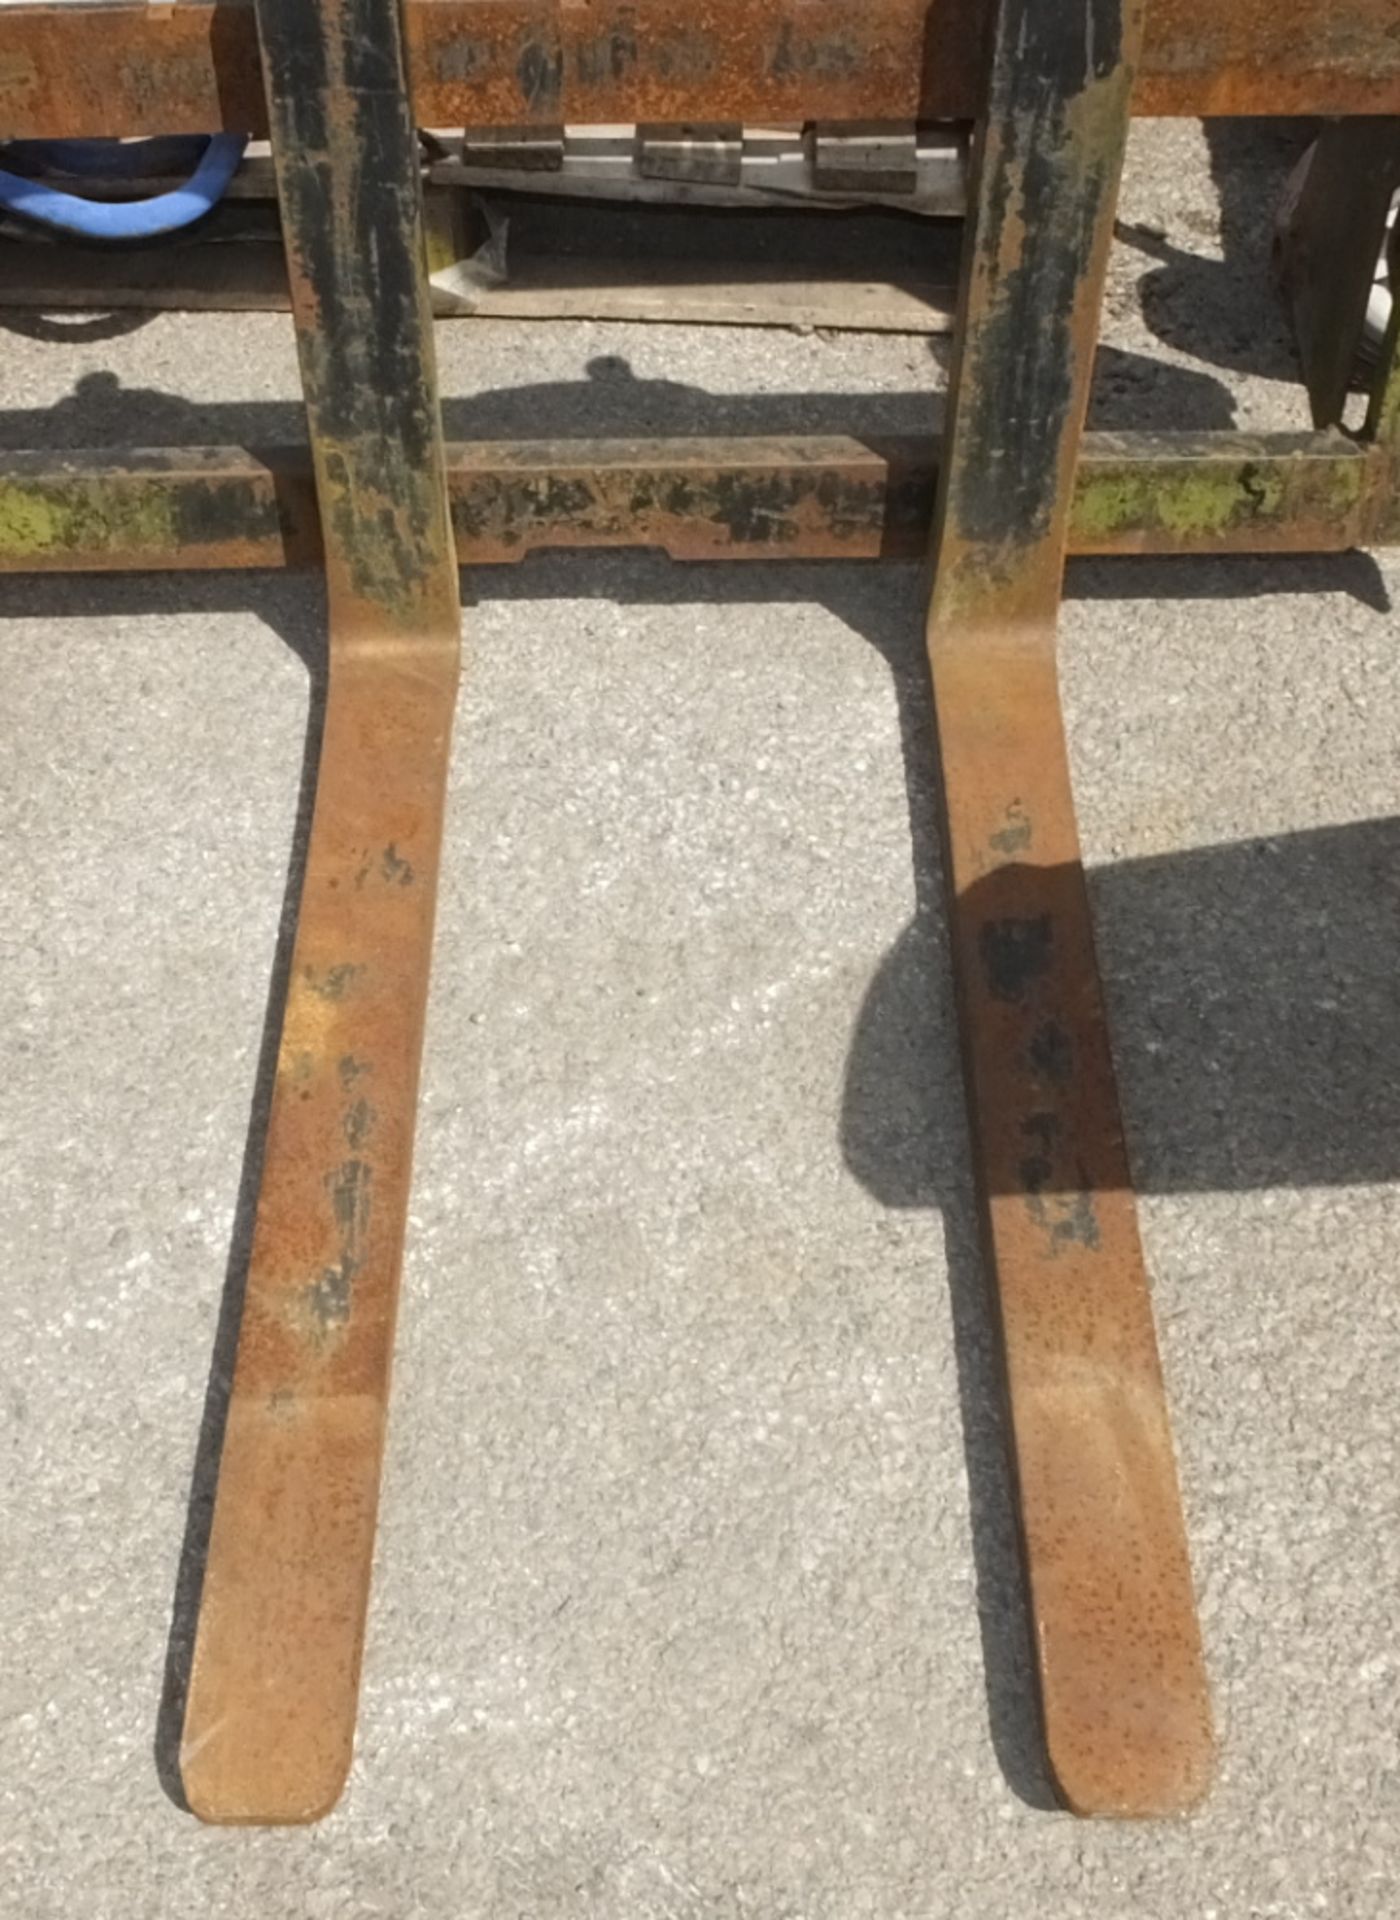 Forklift tines 09 12975 P fork 120 x 110 x 80 - Image 2 of 3